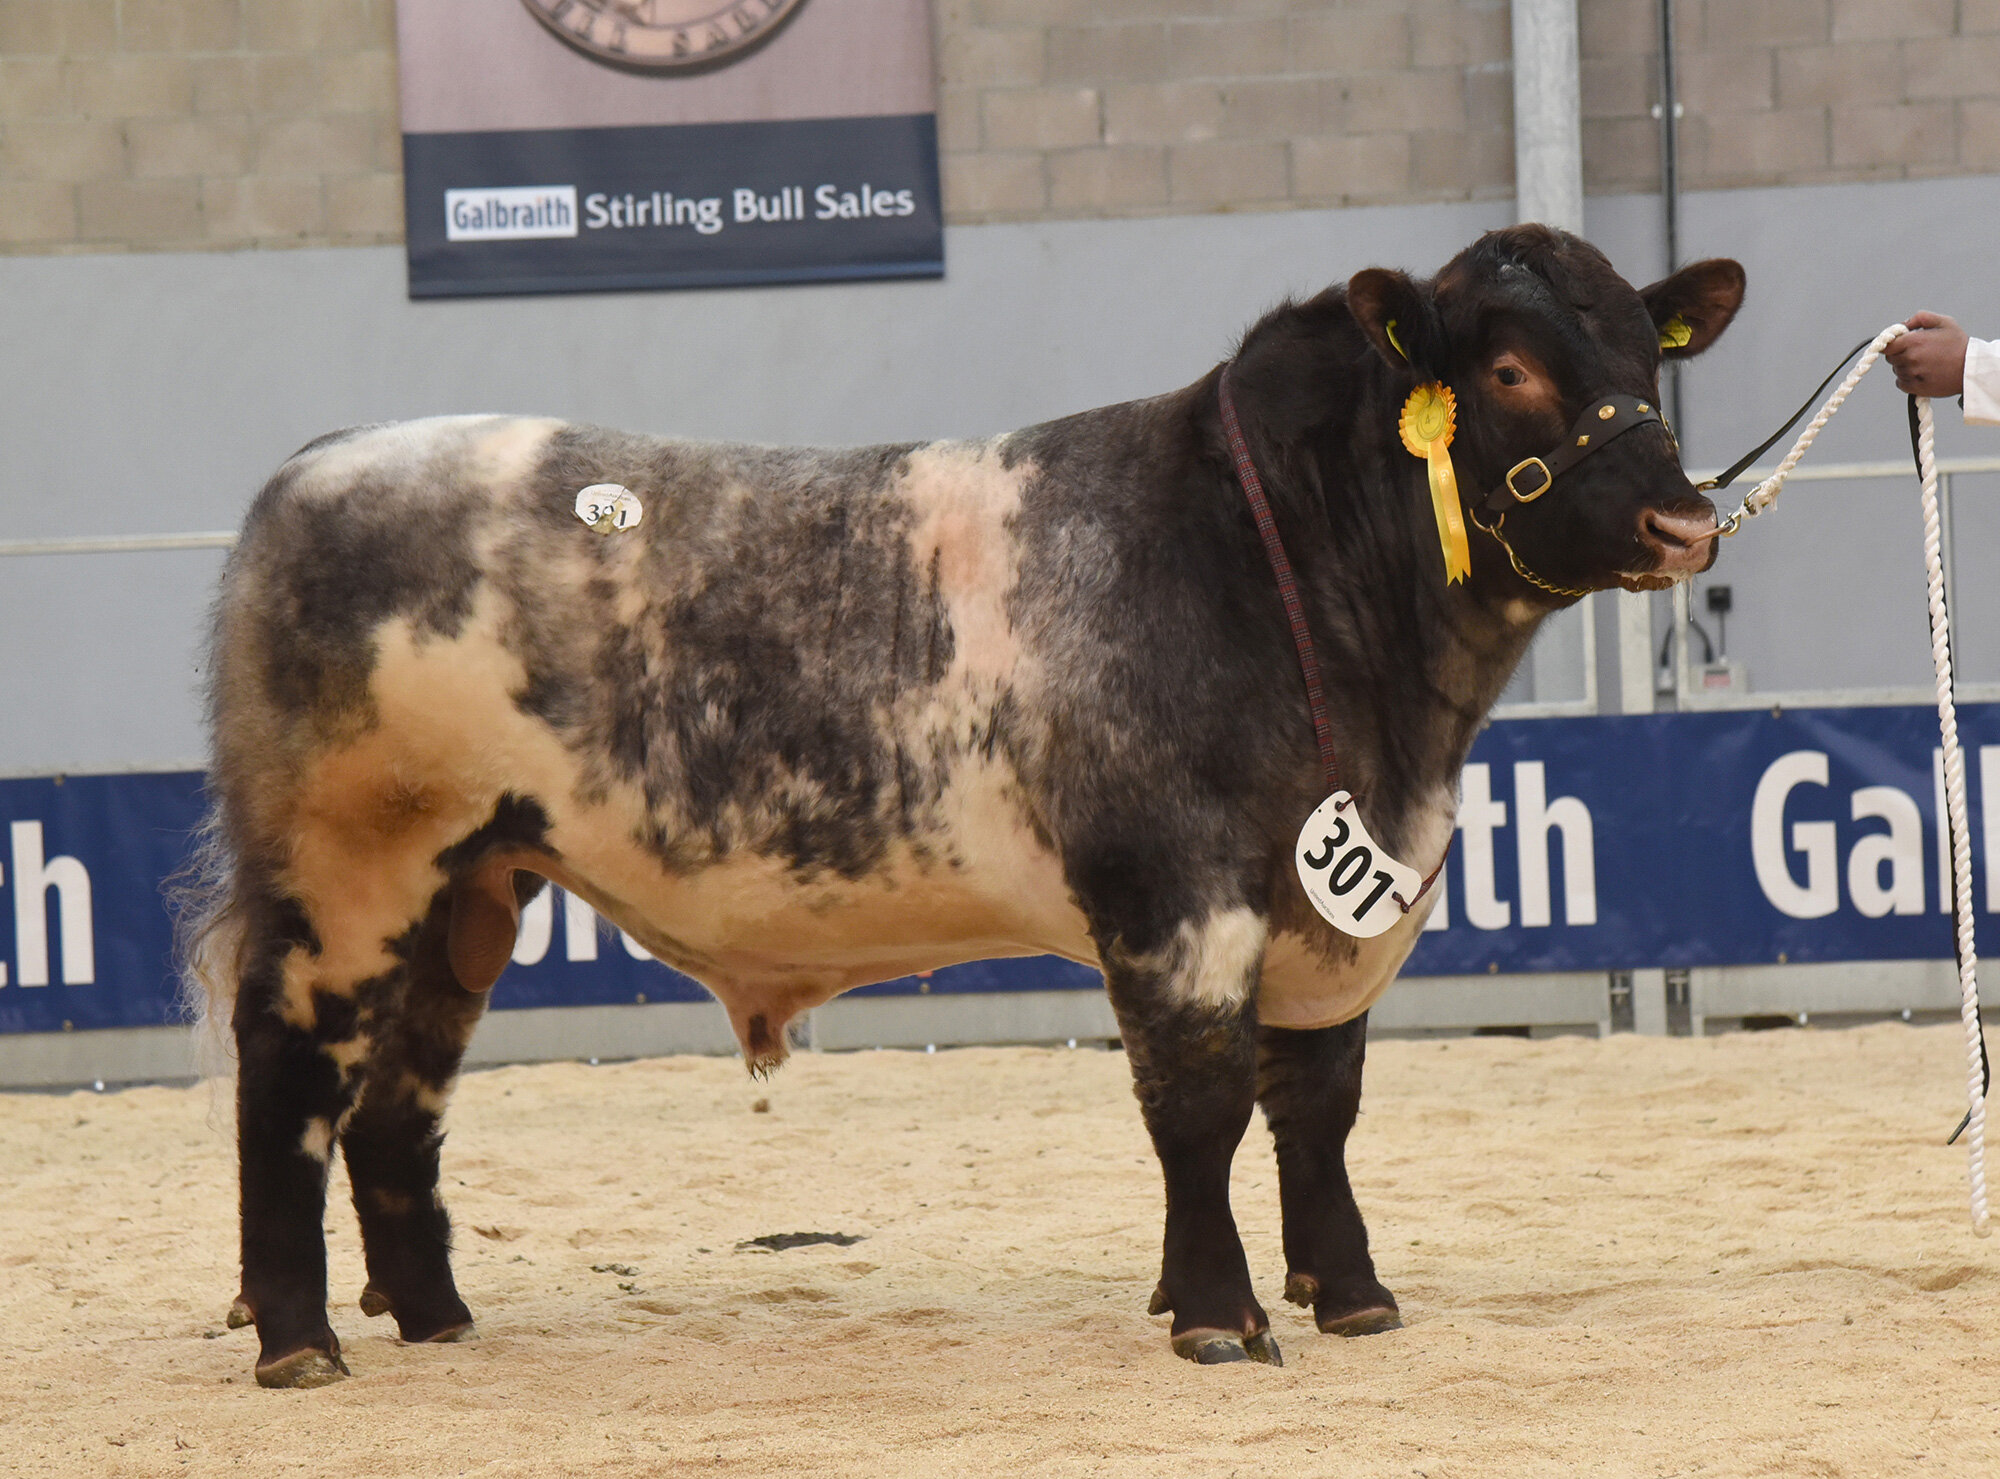 Stirling Bull Sales - May